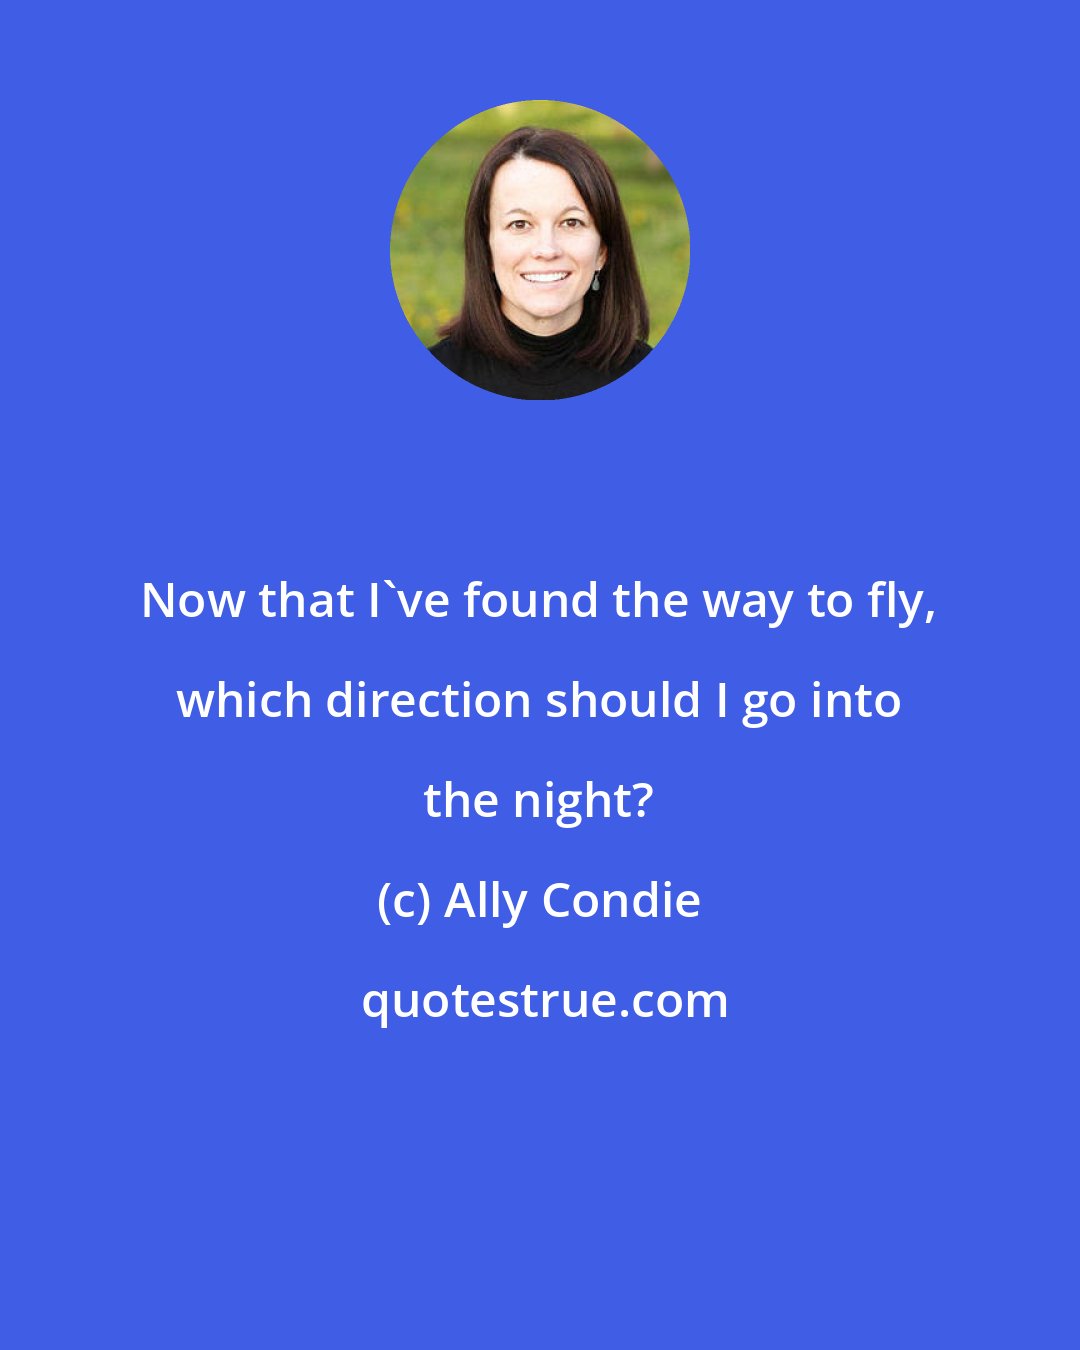 Ally Condie: Now that I've found the way to fly, which direction should I go into the night?